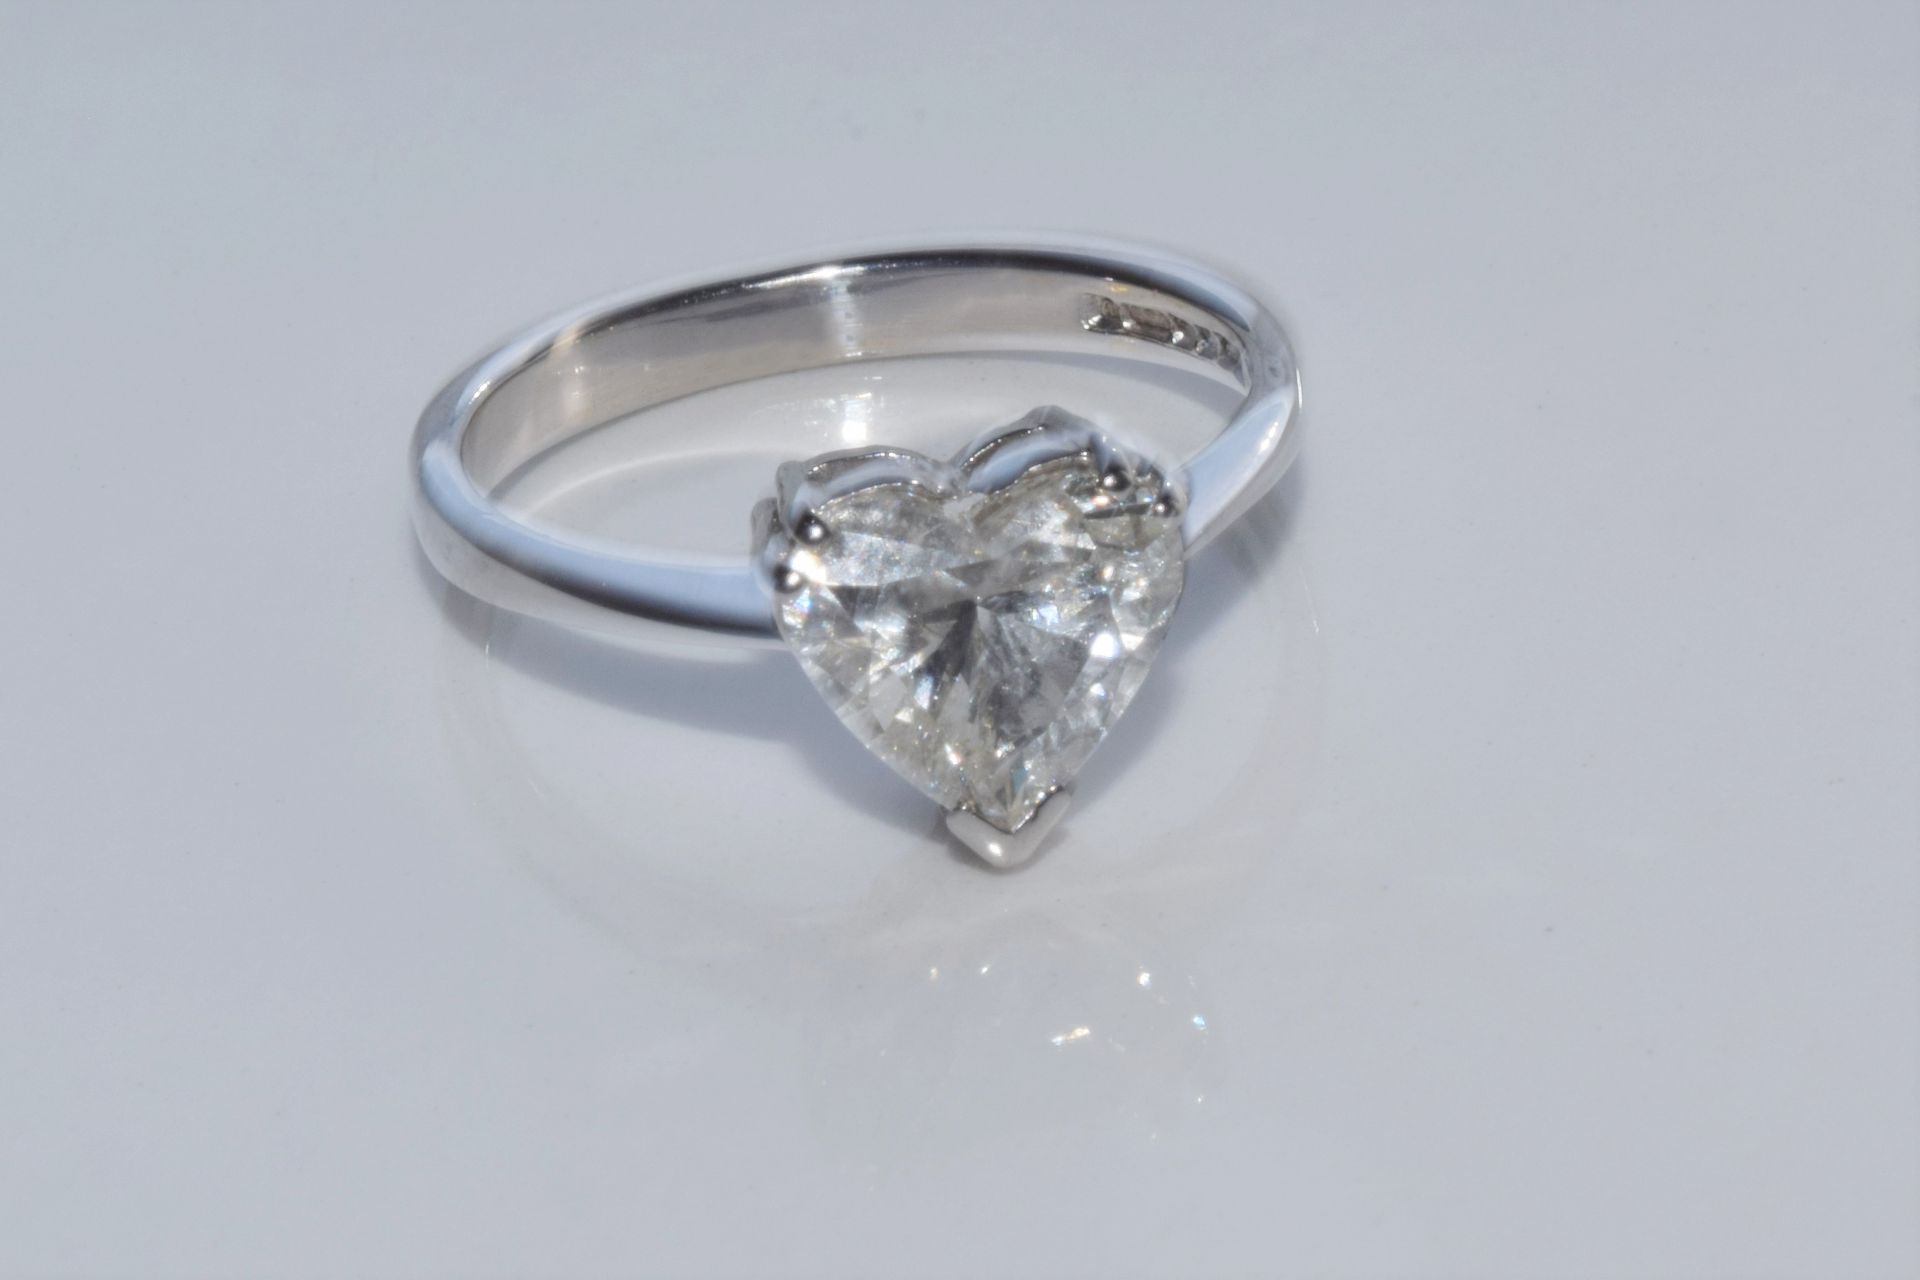 2.16ct Heart cut diamond ring mounted on 18ct white gold band - Image 2 of 5